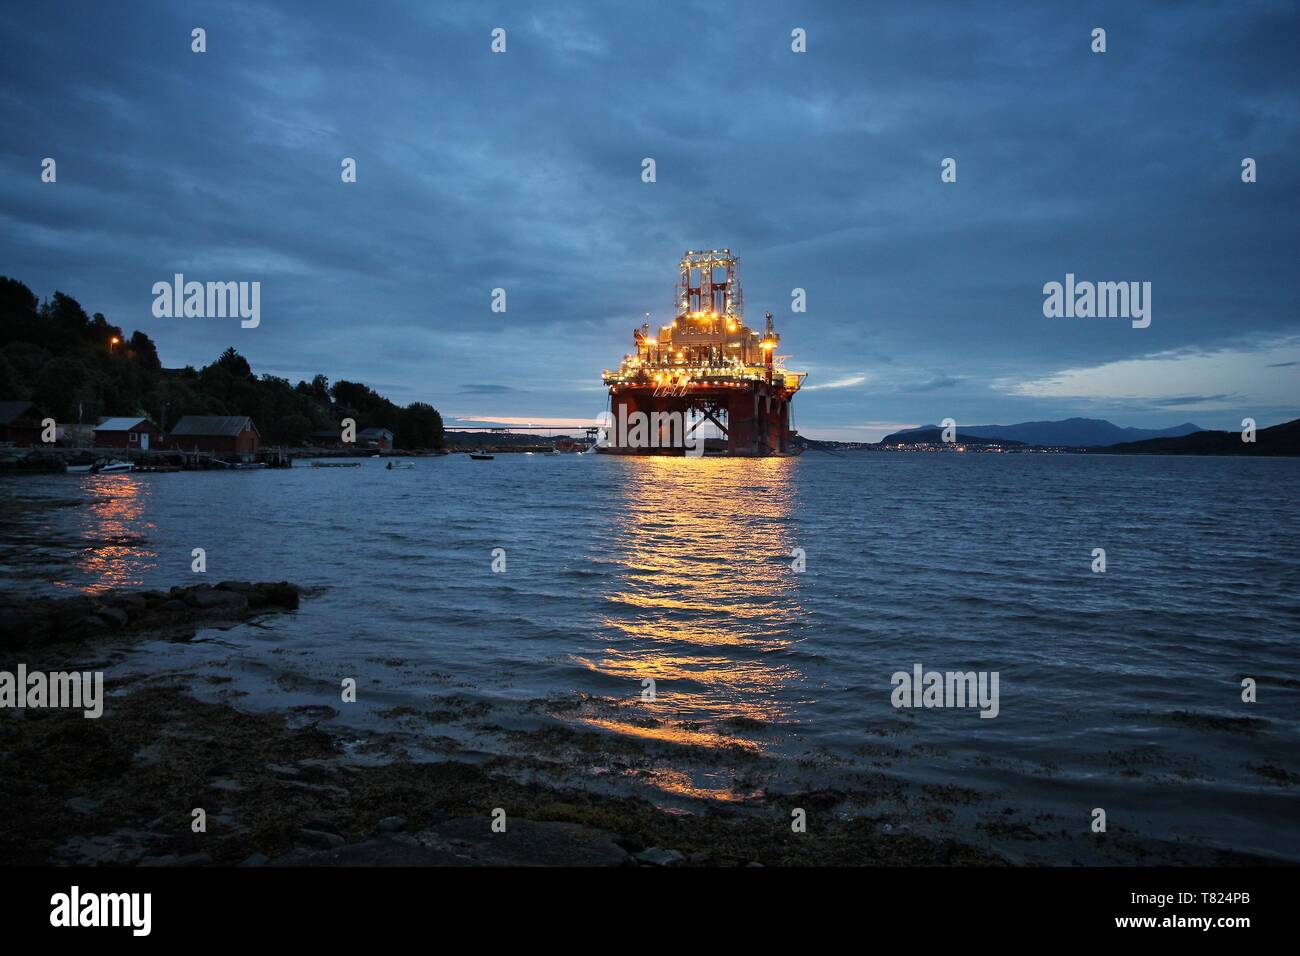 Offshore drilling rig under construction in a fiord in Norway. Oil industry structure. Stock Photo